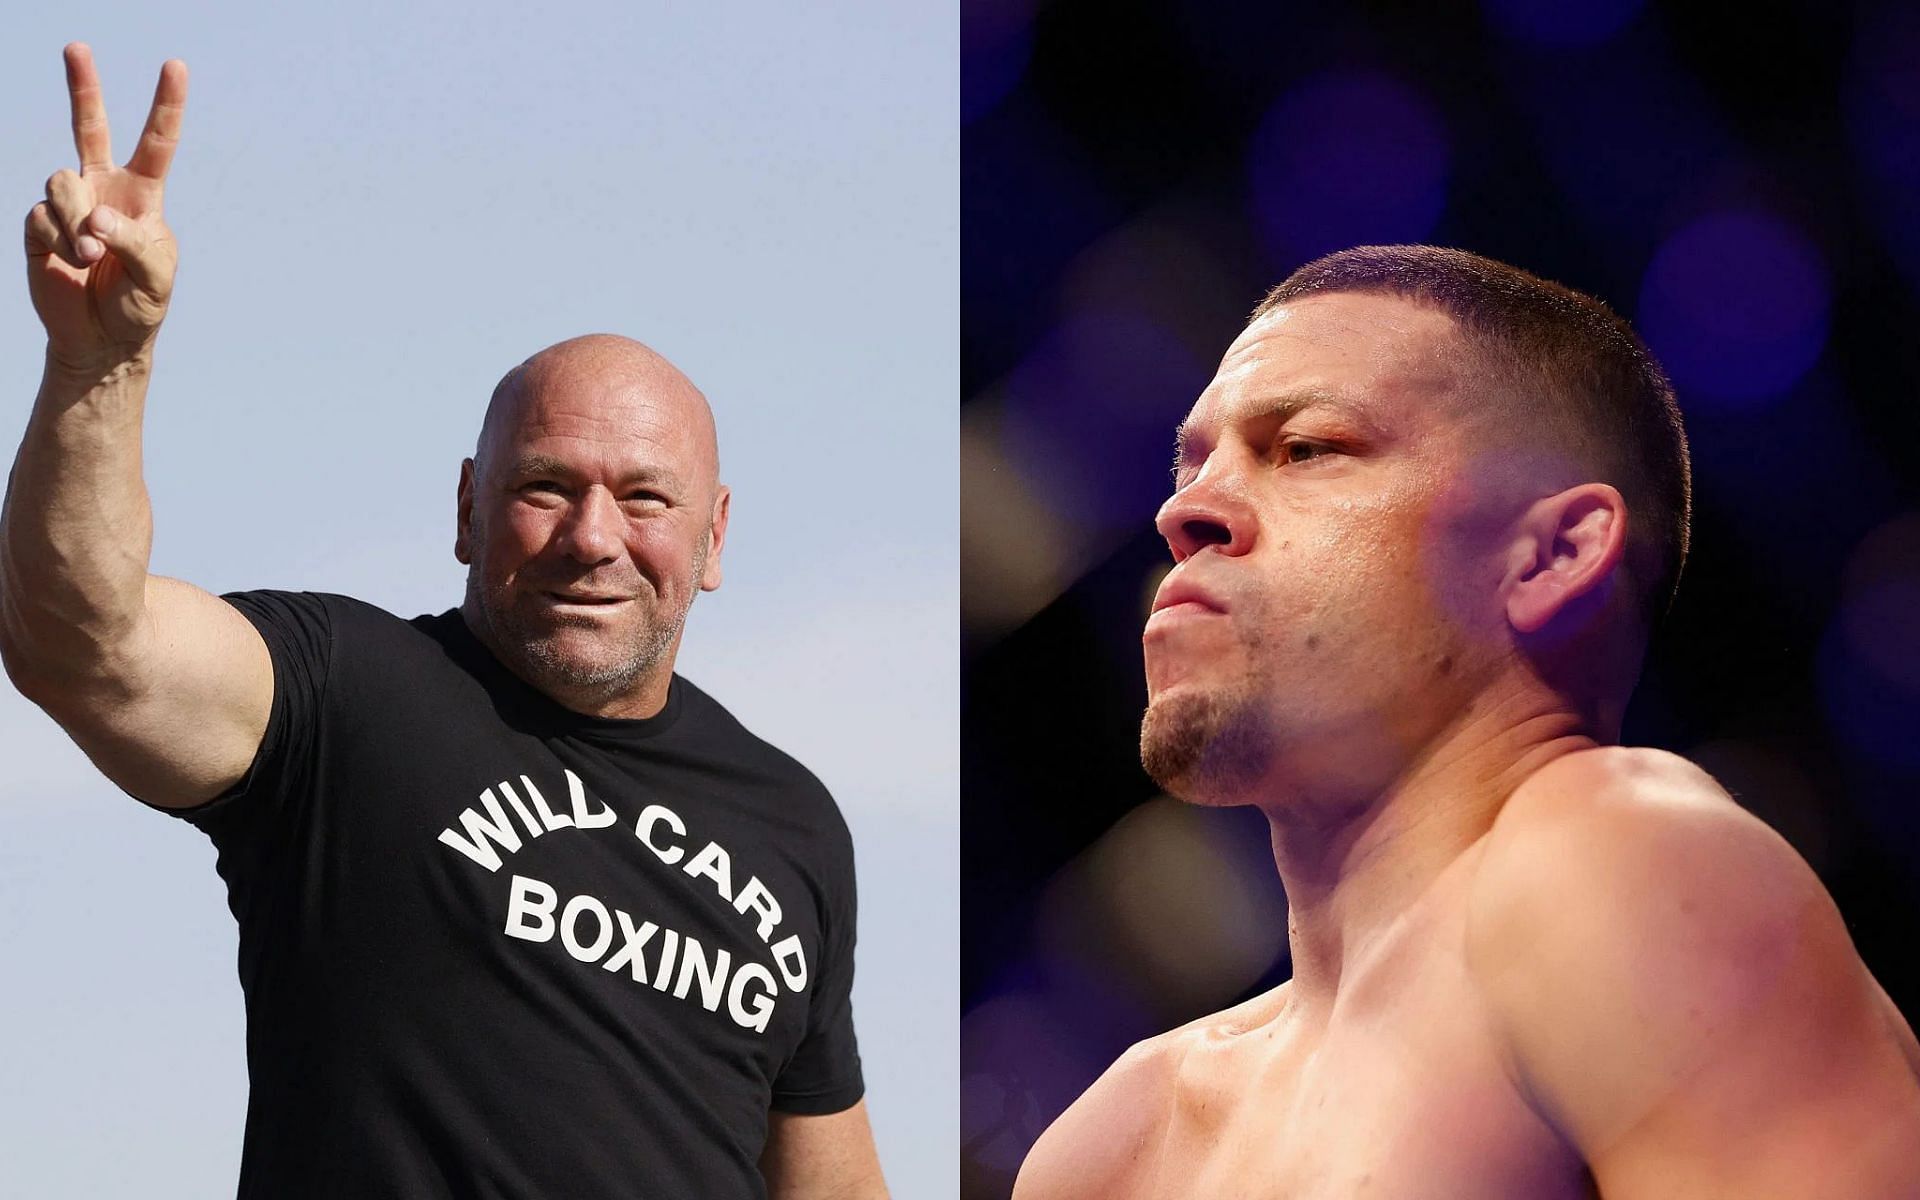 Dana White (Left) and Nate Diaz (Right) (Images courtesy of Getty)